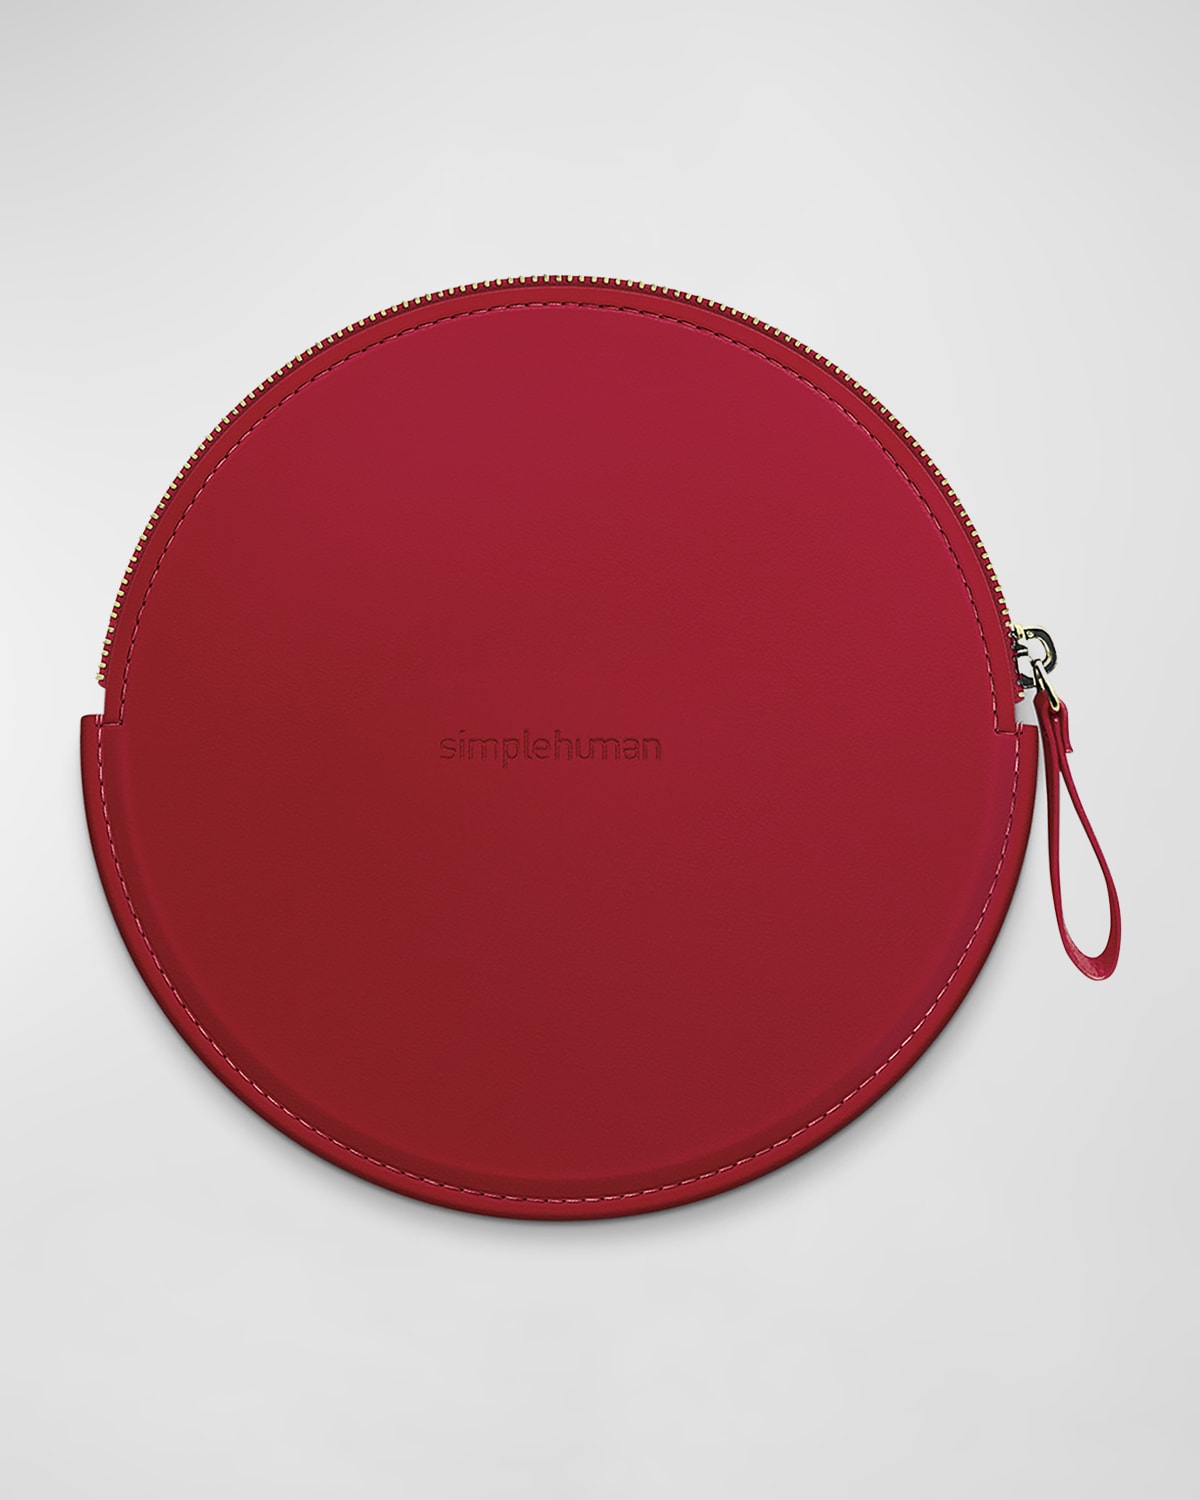 Simplehuman Sensor Mirror Compact Case In Red